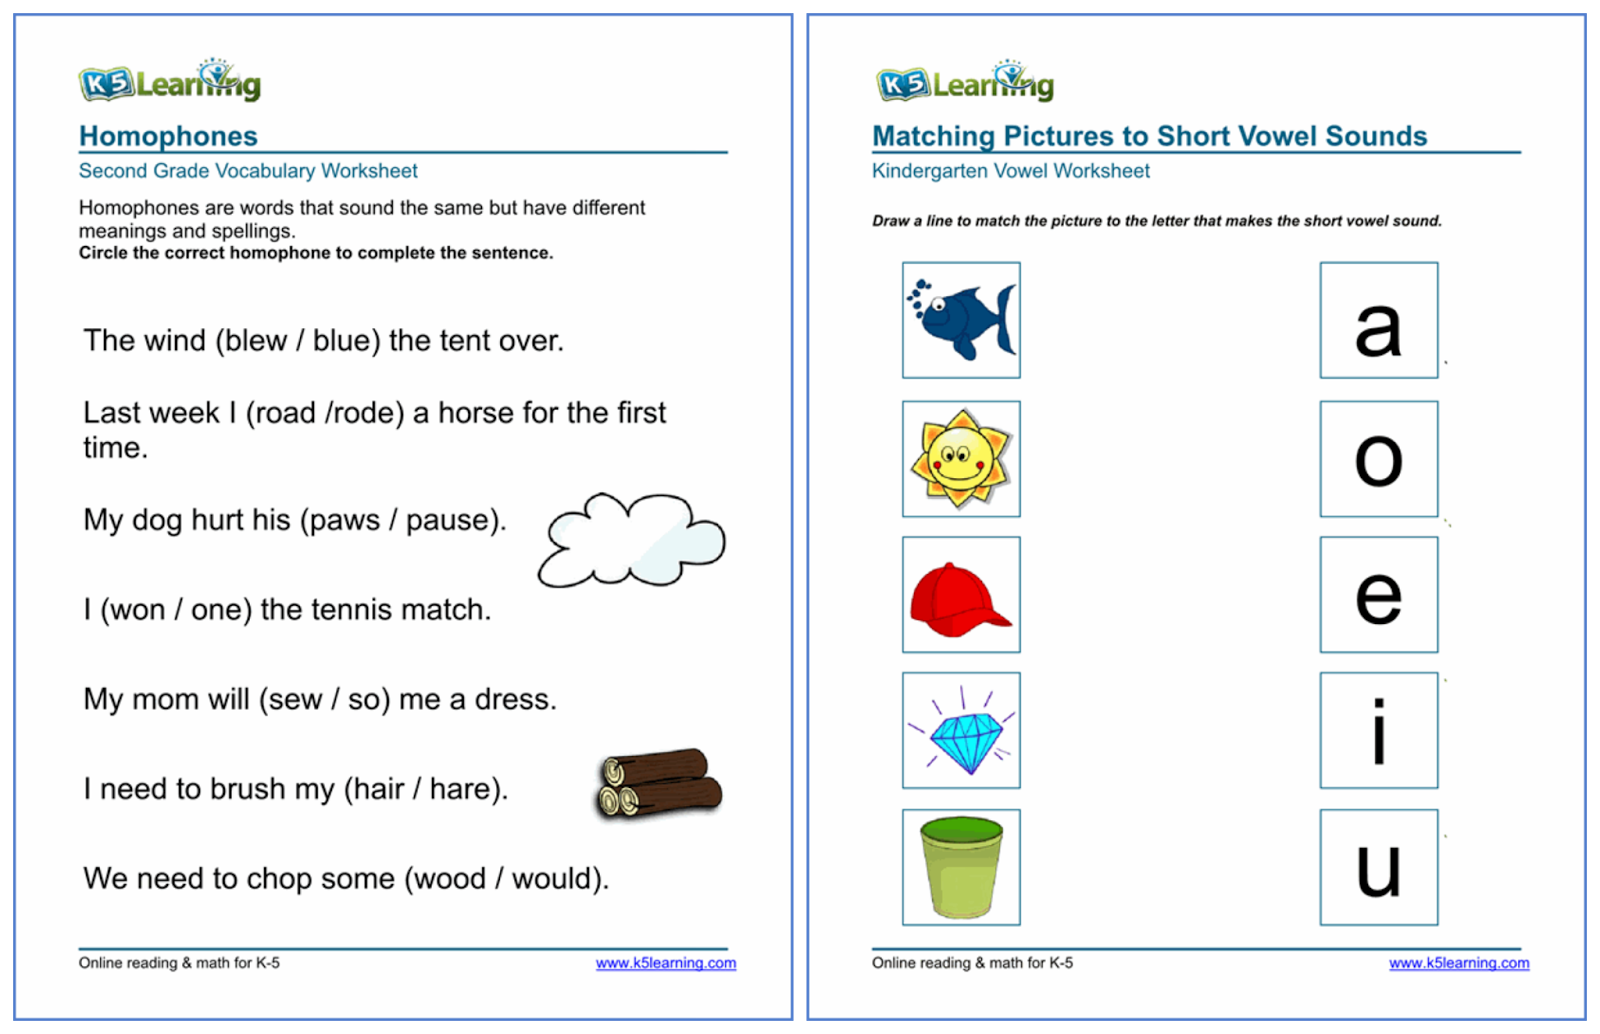 K5 Learning Worksheets Printable Crossword Puzzles Bingo Cards Forms